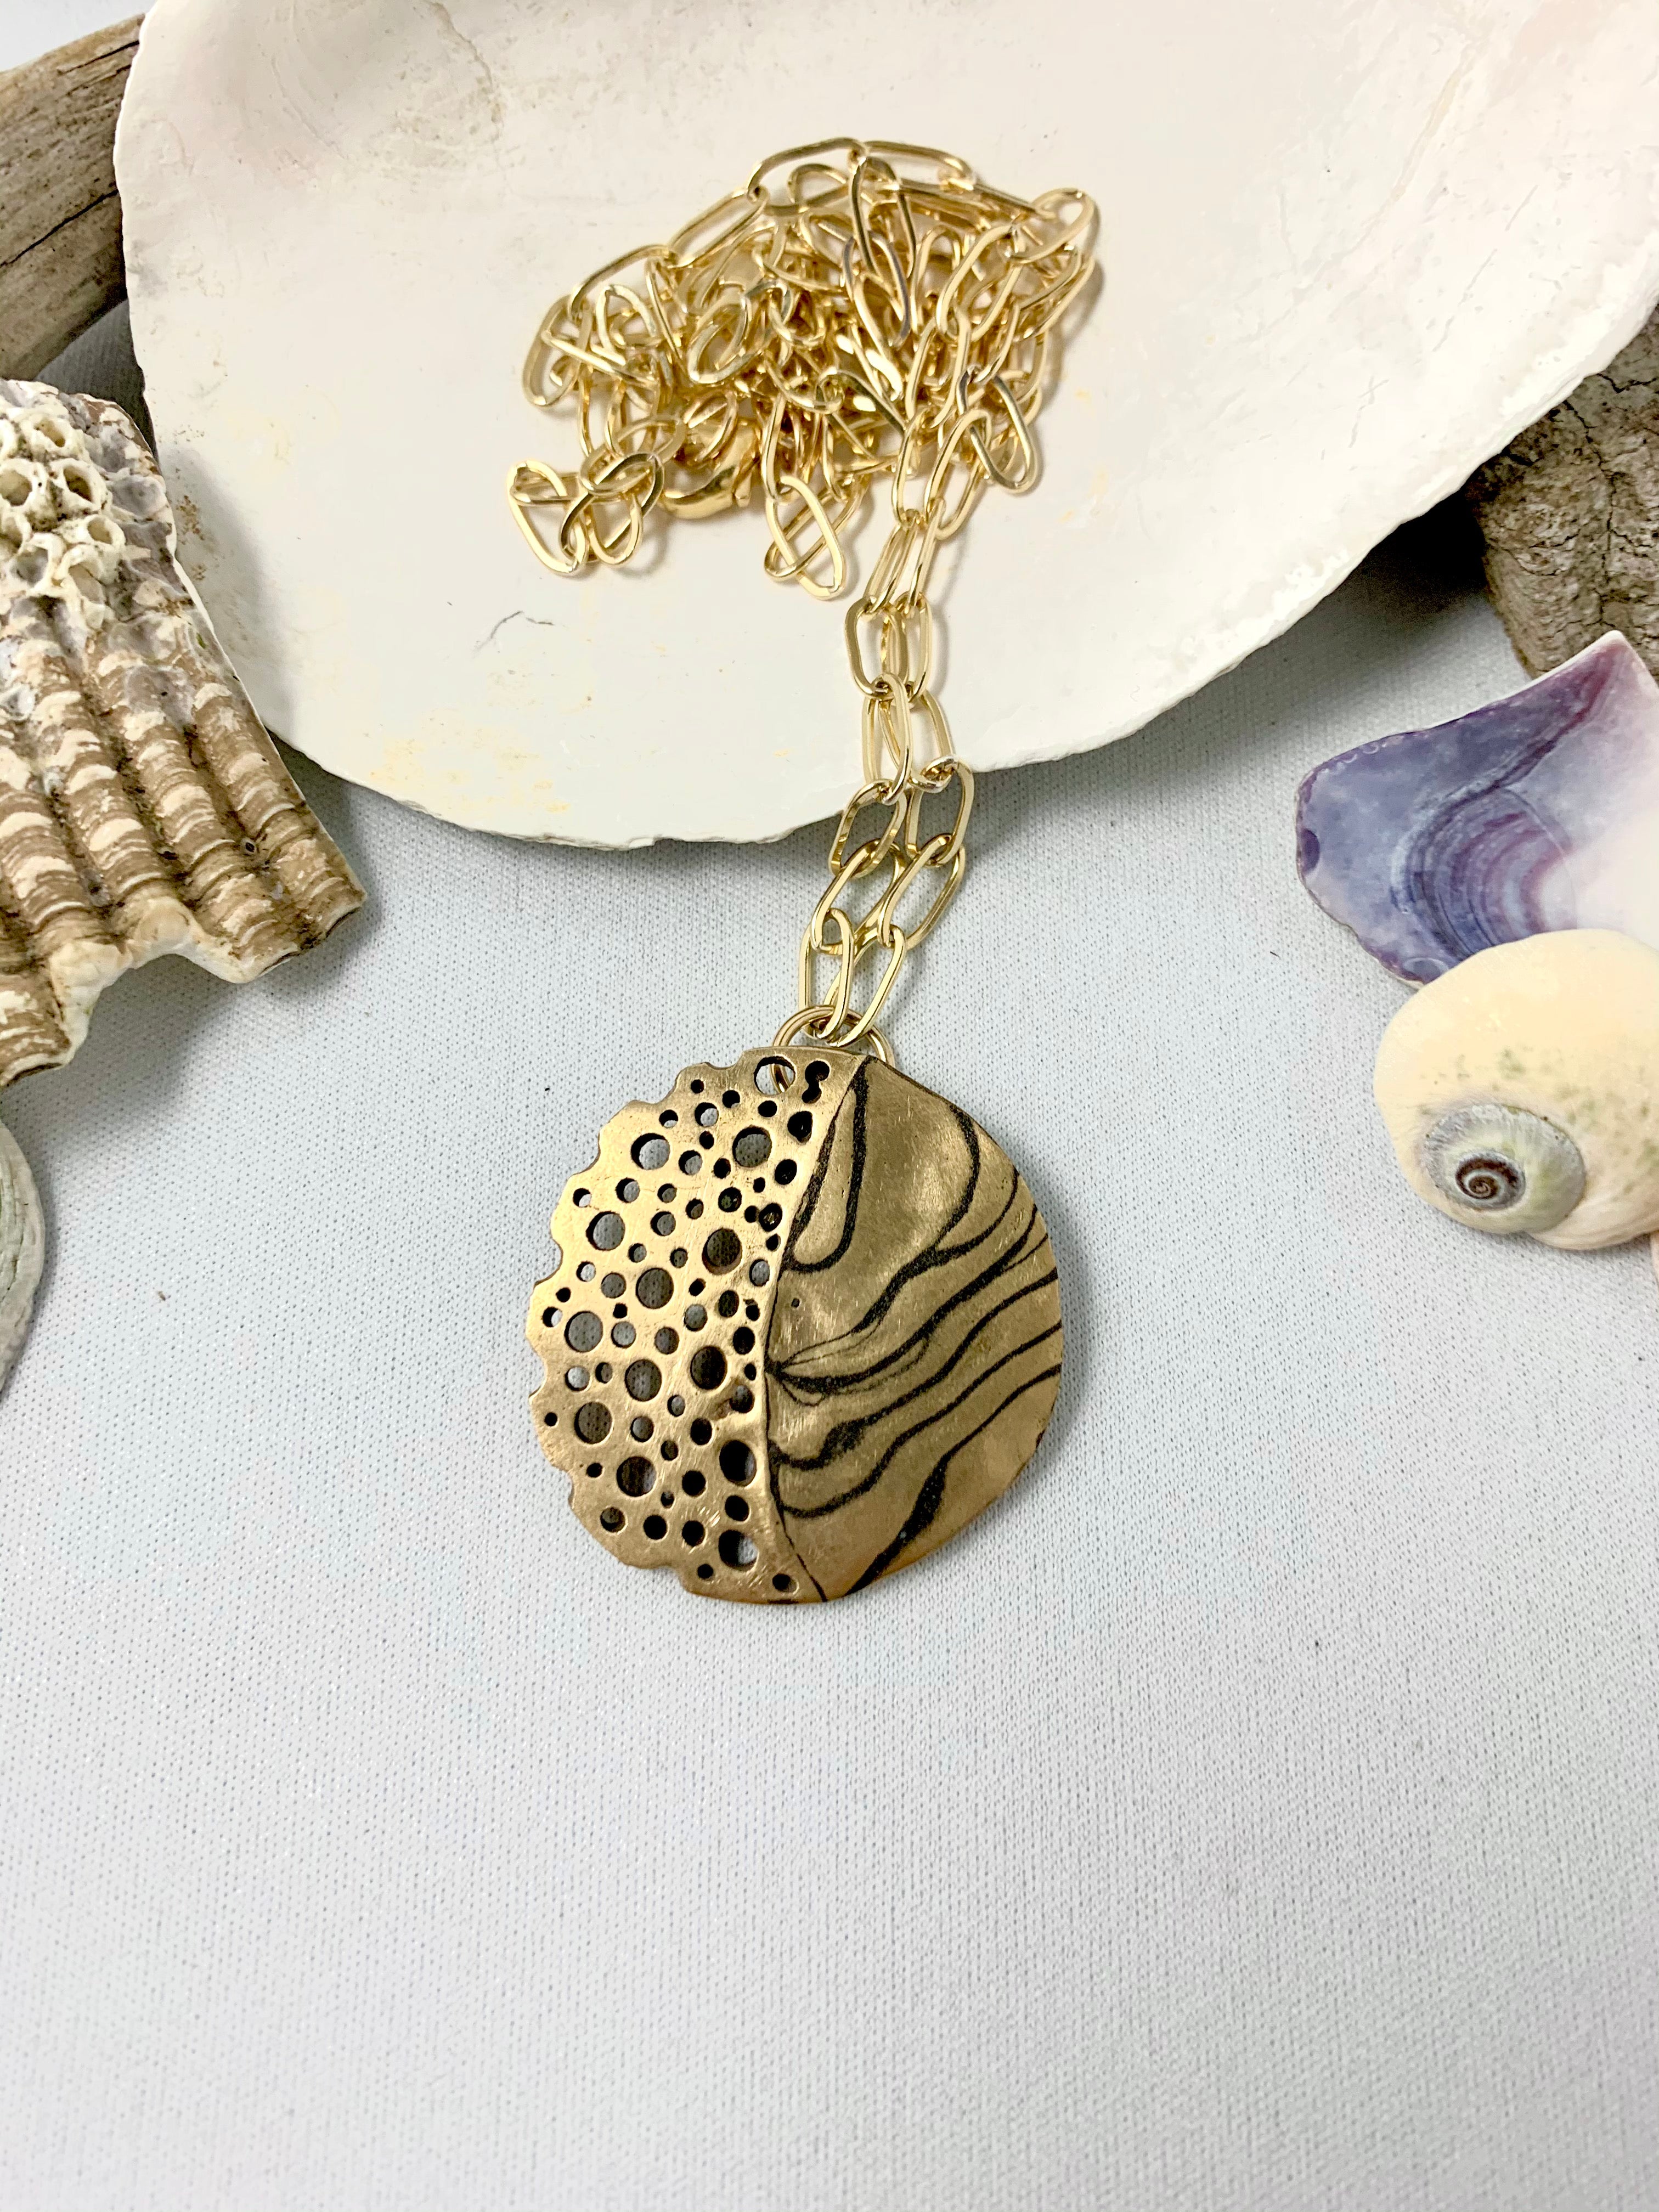 Unique patterned metal artisan made ocean inspired necklace